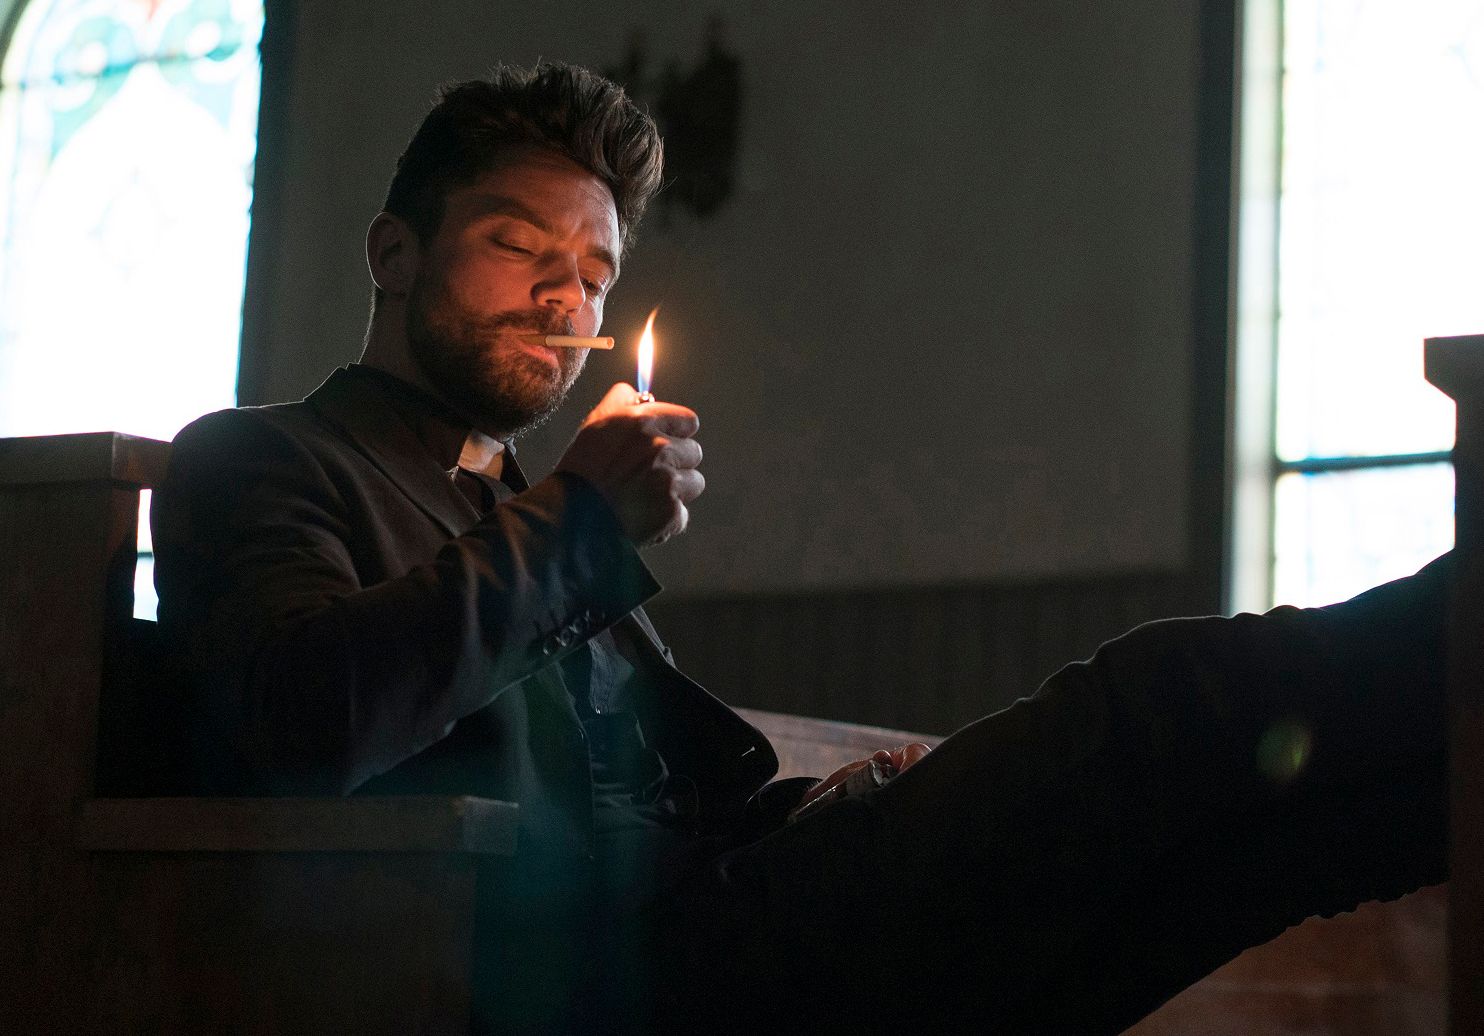 hugely controversial preacher exclusive to amazon prime instant video in uk image 1